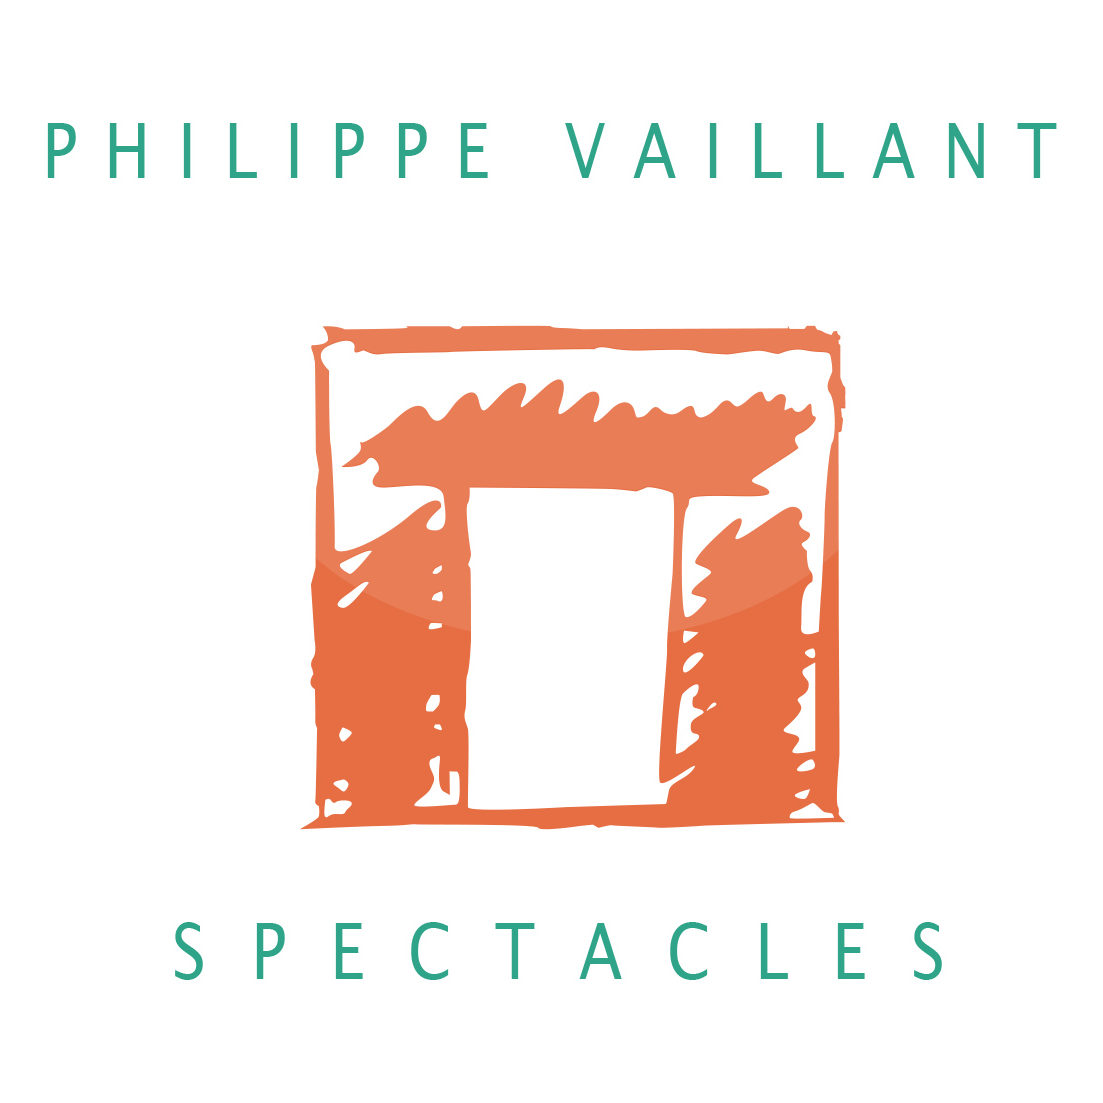 PHILIPPE VAILLANT SPECTACLES